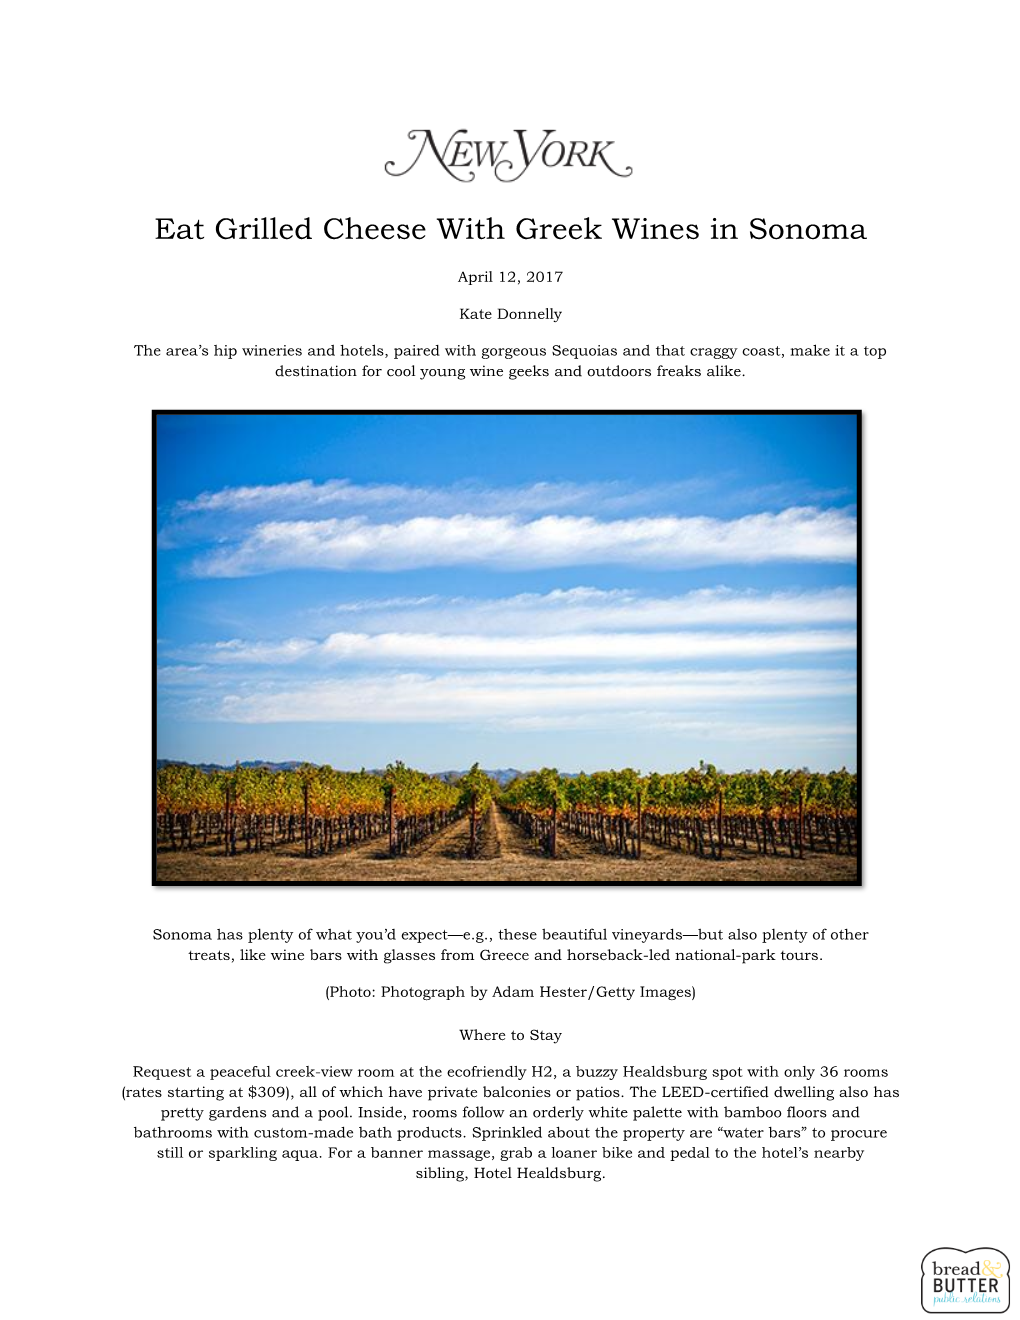 Eat Grilled Cheese with Greek Wines in Sonoma